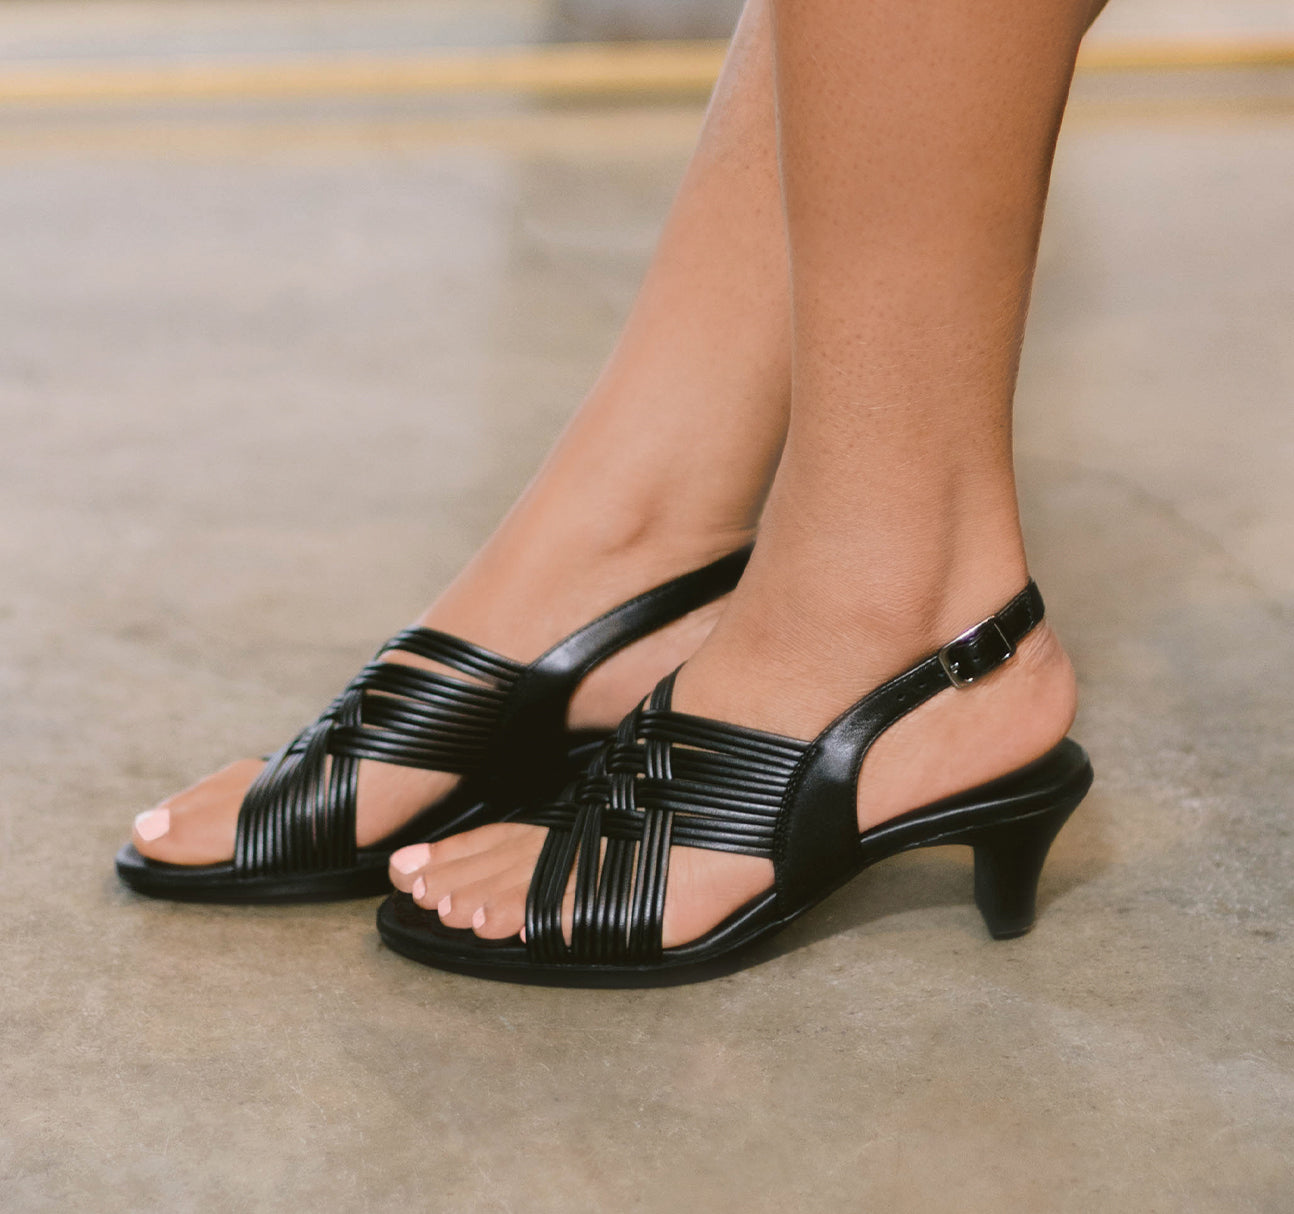 Marianna dress sandal with crisscross woven leather rolled straps, a back strap with an adjustable buckle on Leawood kitten heel. - lifestyle mobile